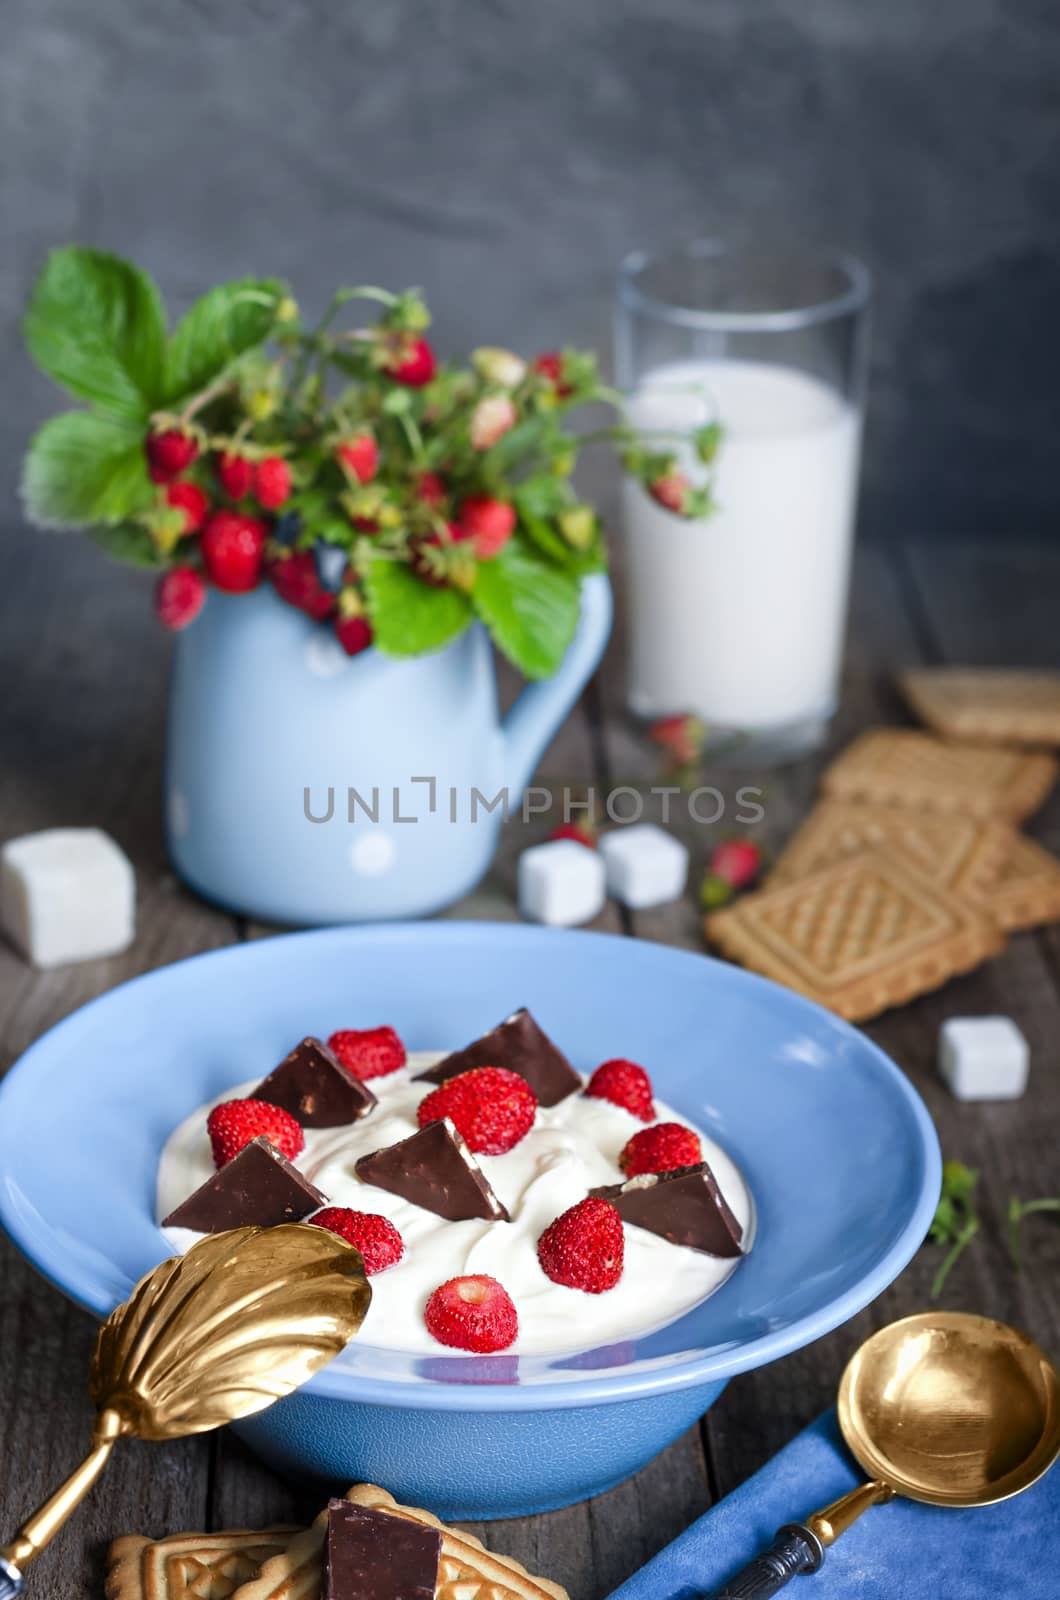 Strawberry with cream in a bowl, cookies and milk in glass on old wooden surface. Bouquet with strawberries in a vase and antique spoon in a rustic style.